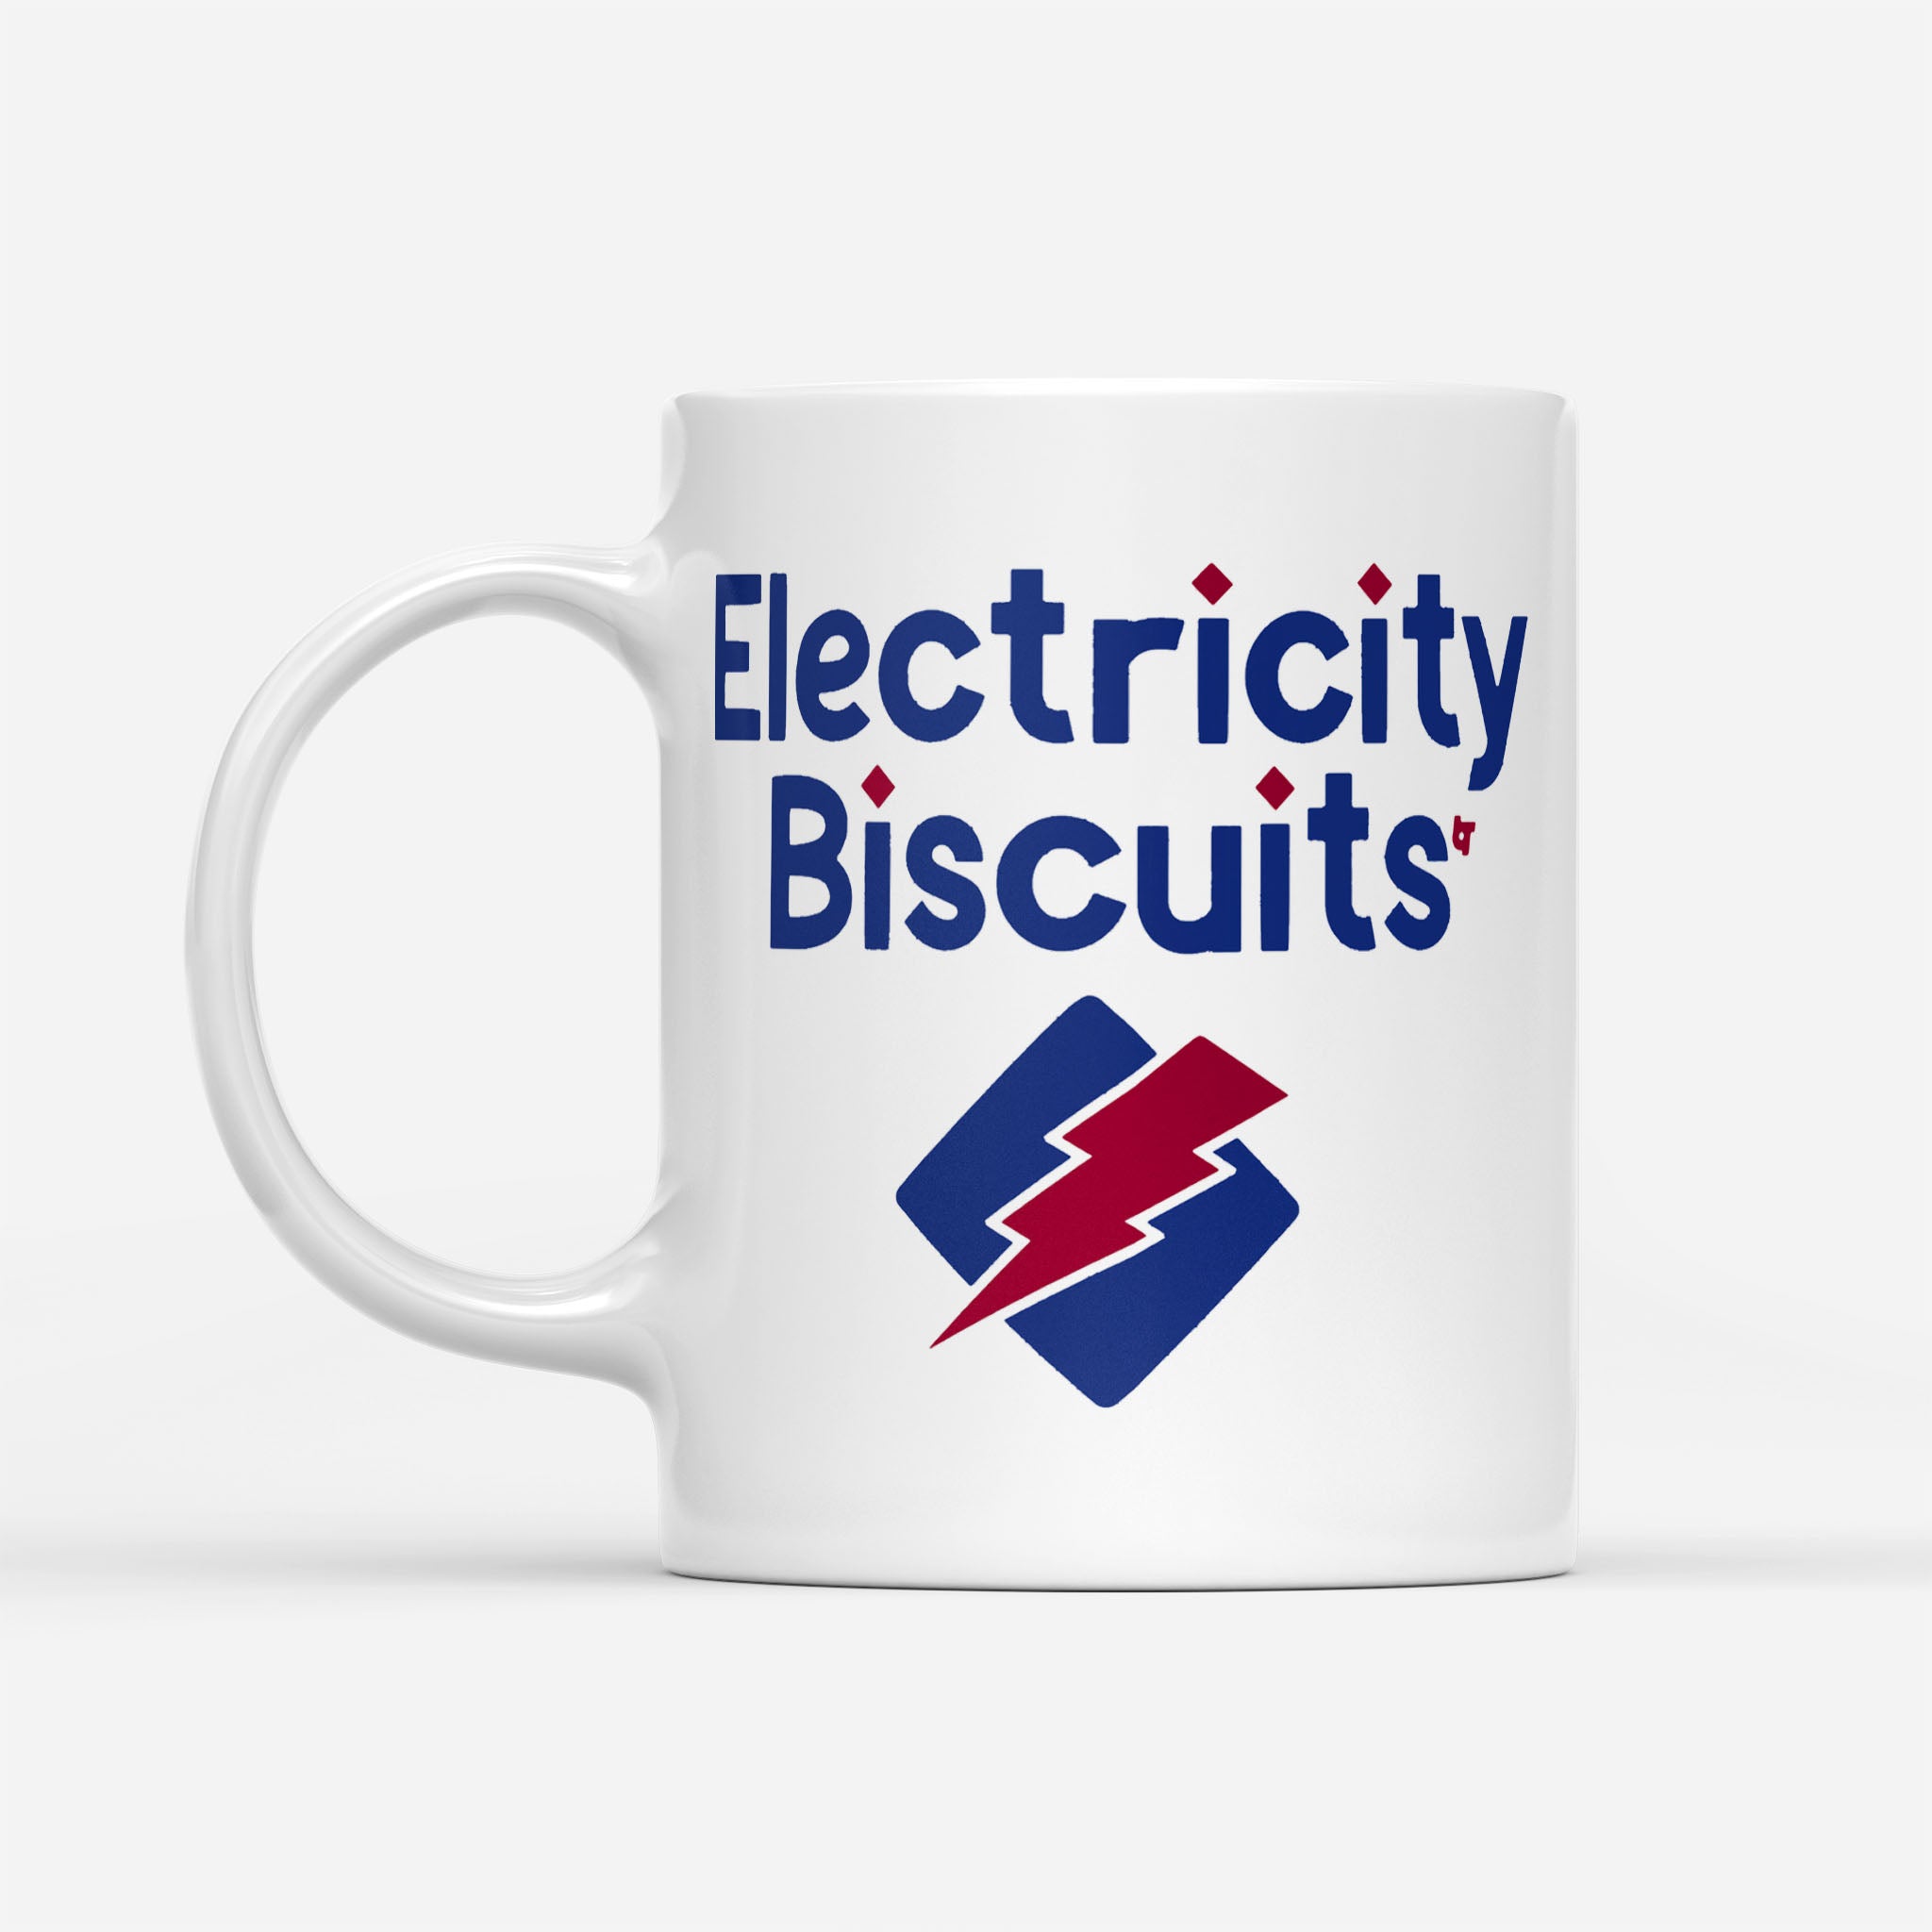 Electricity Biscuits - White Mug